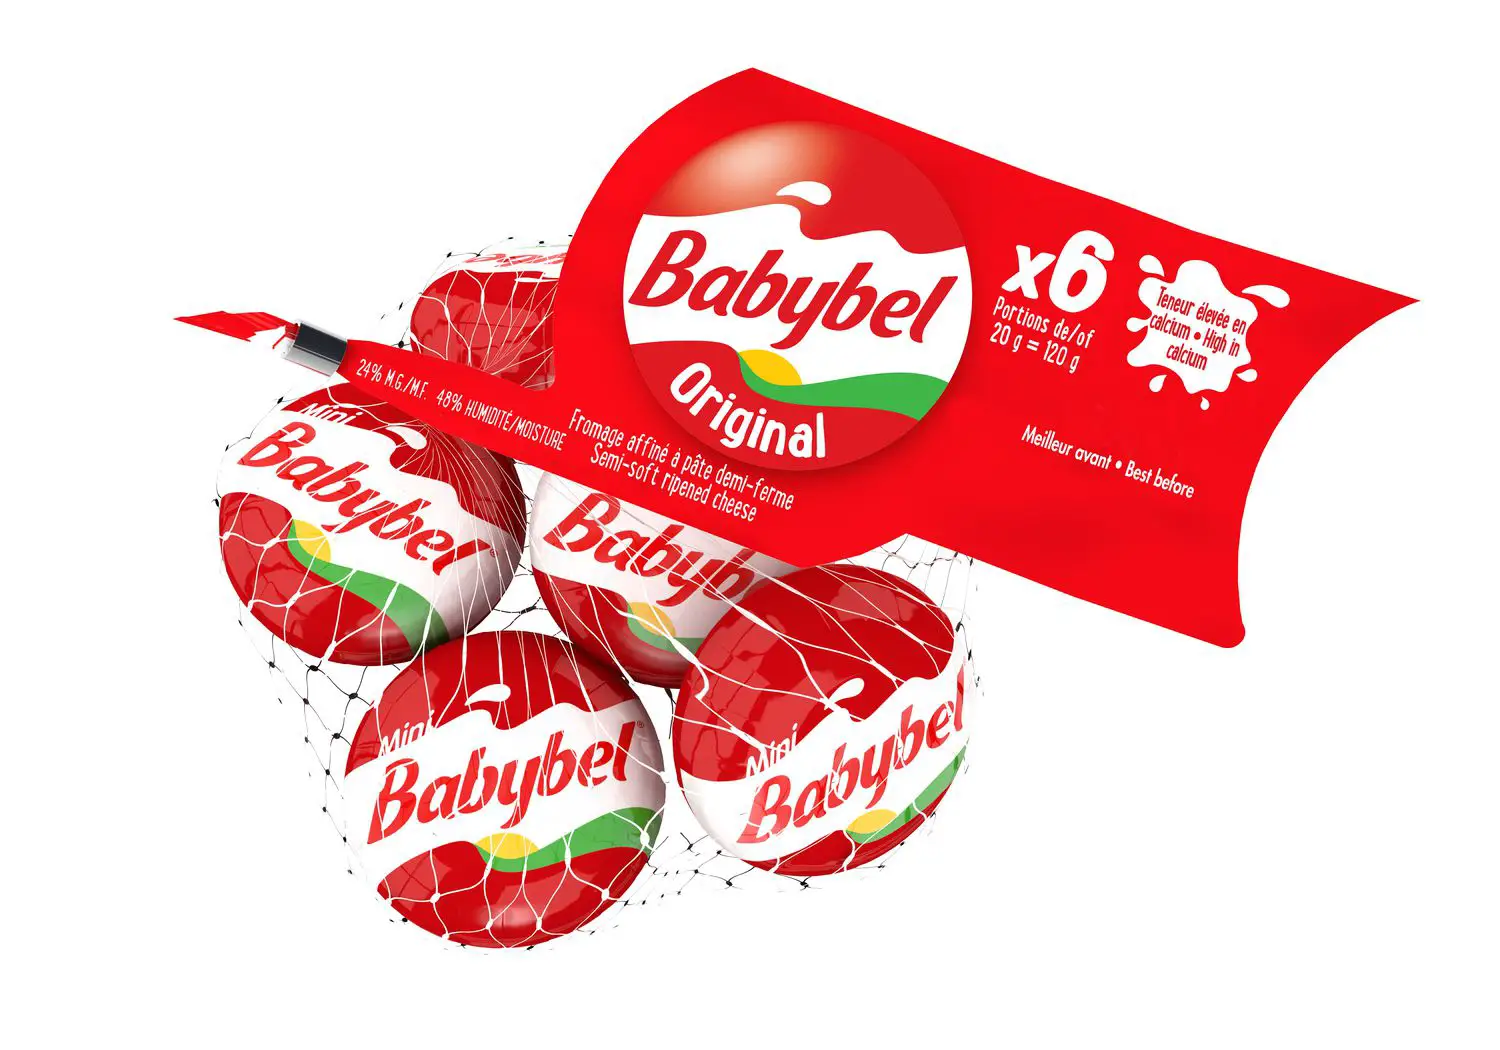 Babybel Cheese Original What Kind Of Cheese